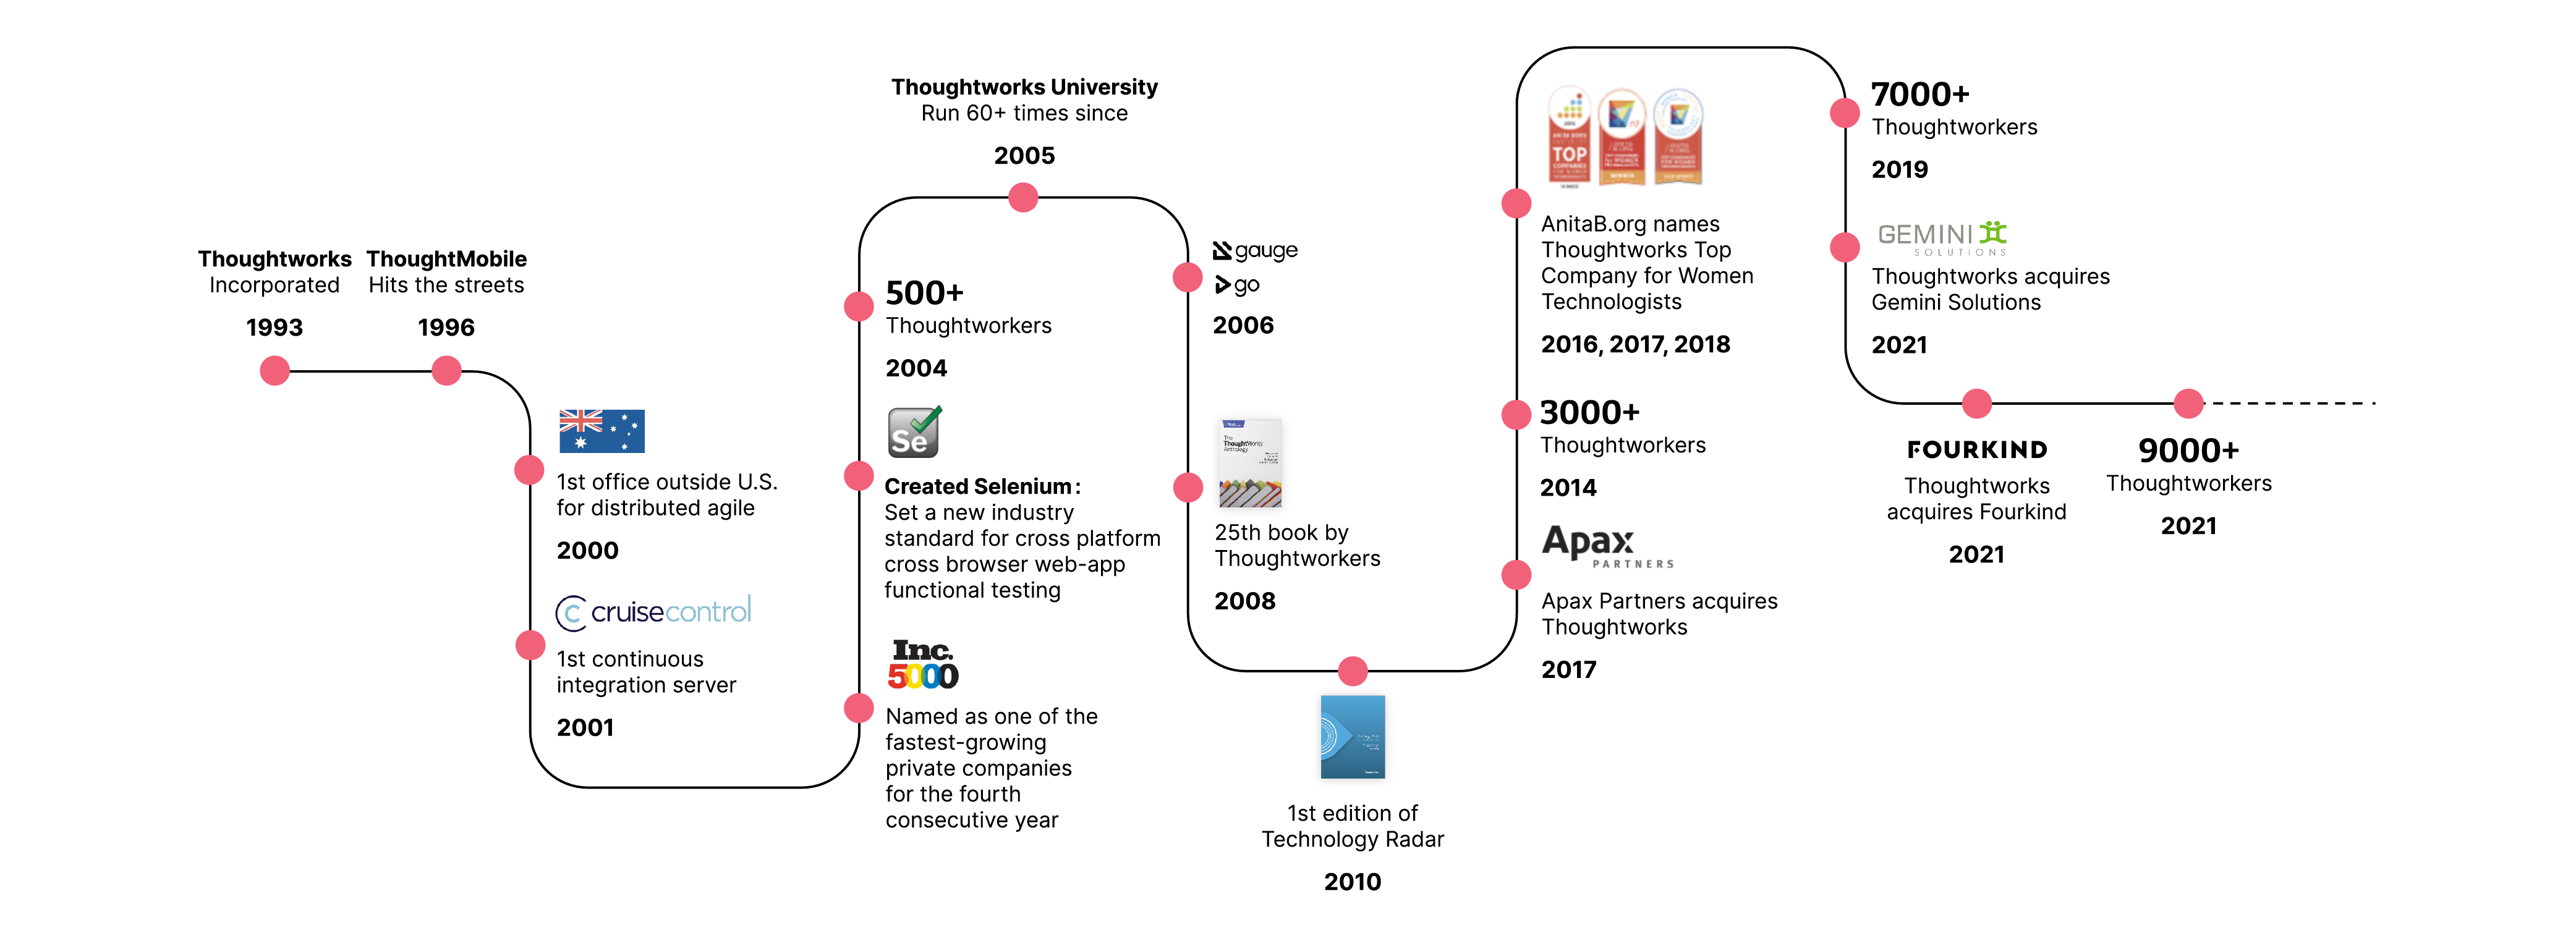 Thoughtworks timeline